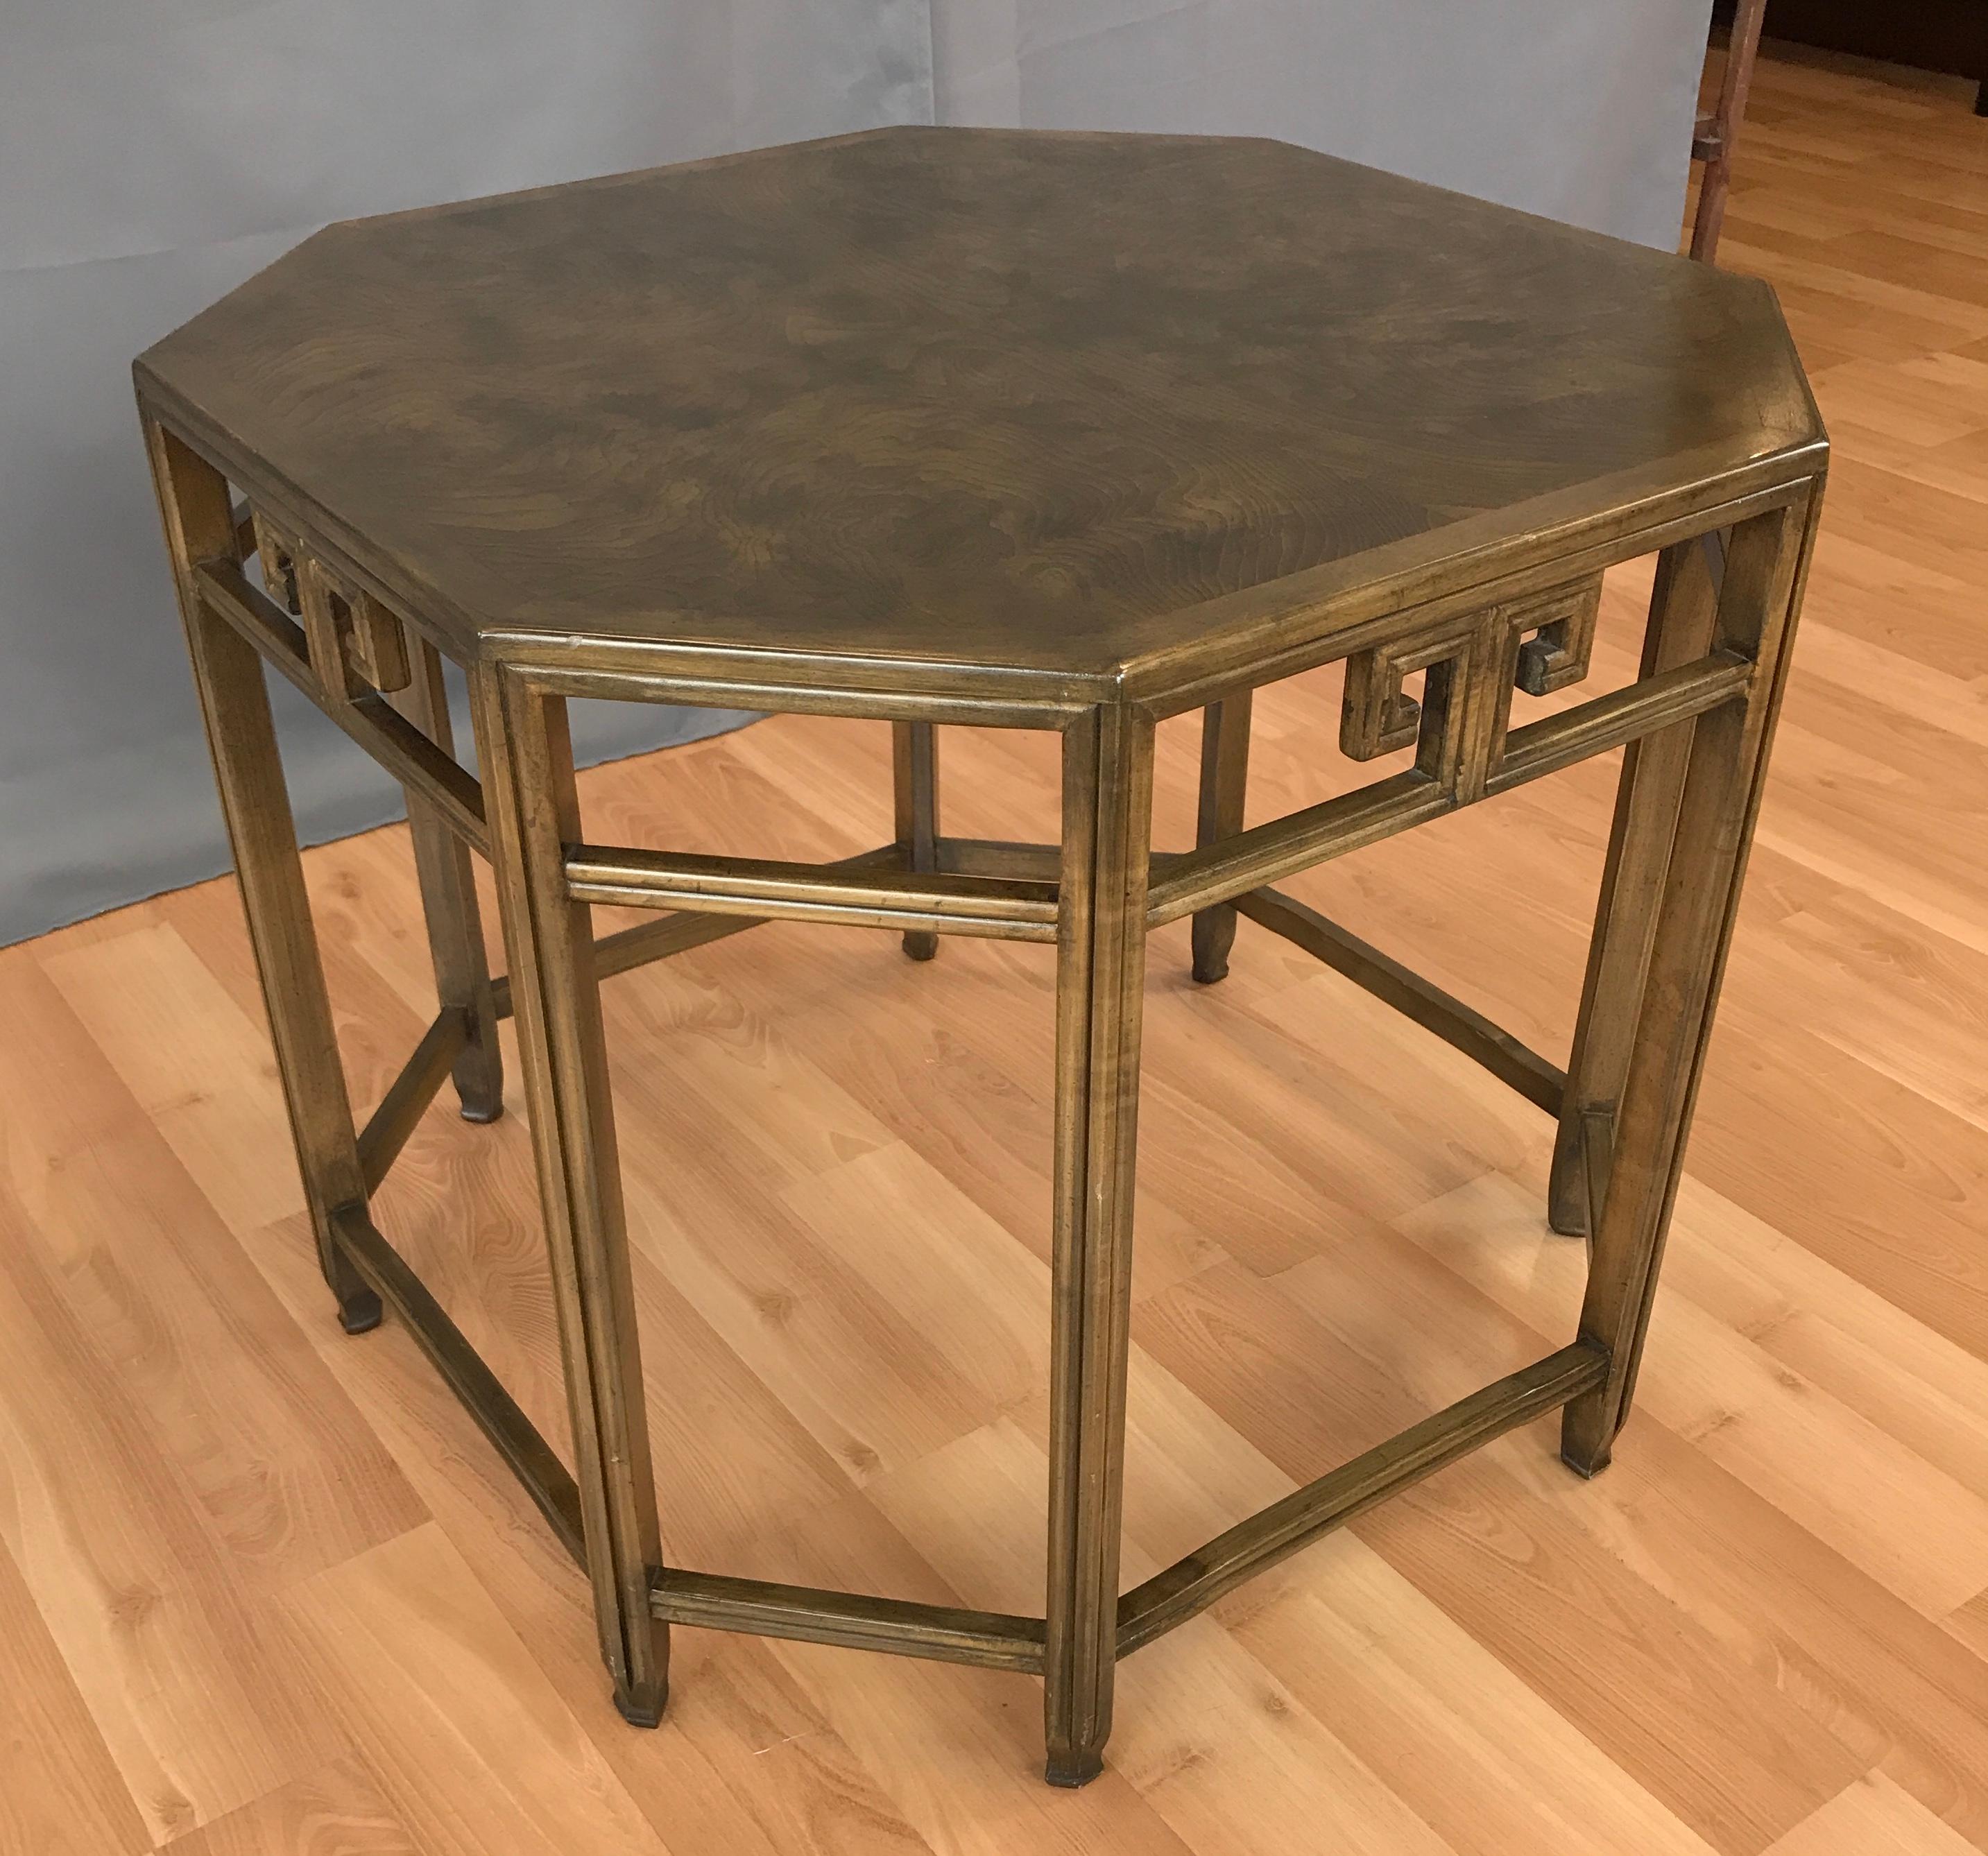 Offered is a Michael Taylor design for Baker, an octagonal end table for his Far East collection.
Burl wood walnut top, with Greek key detailing to its sides, open design so visually it doesn't take up a lot of room.